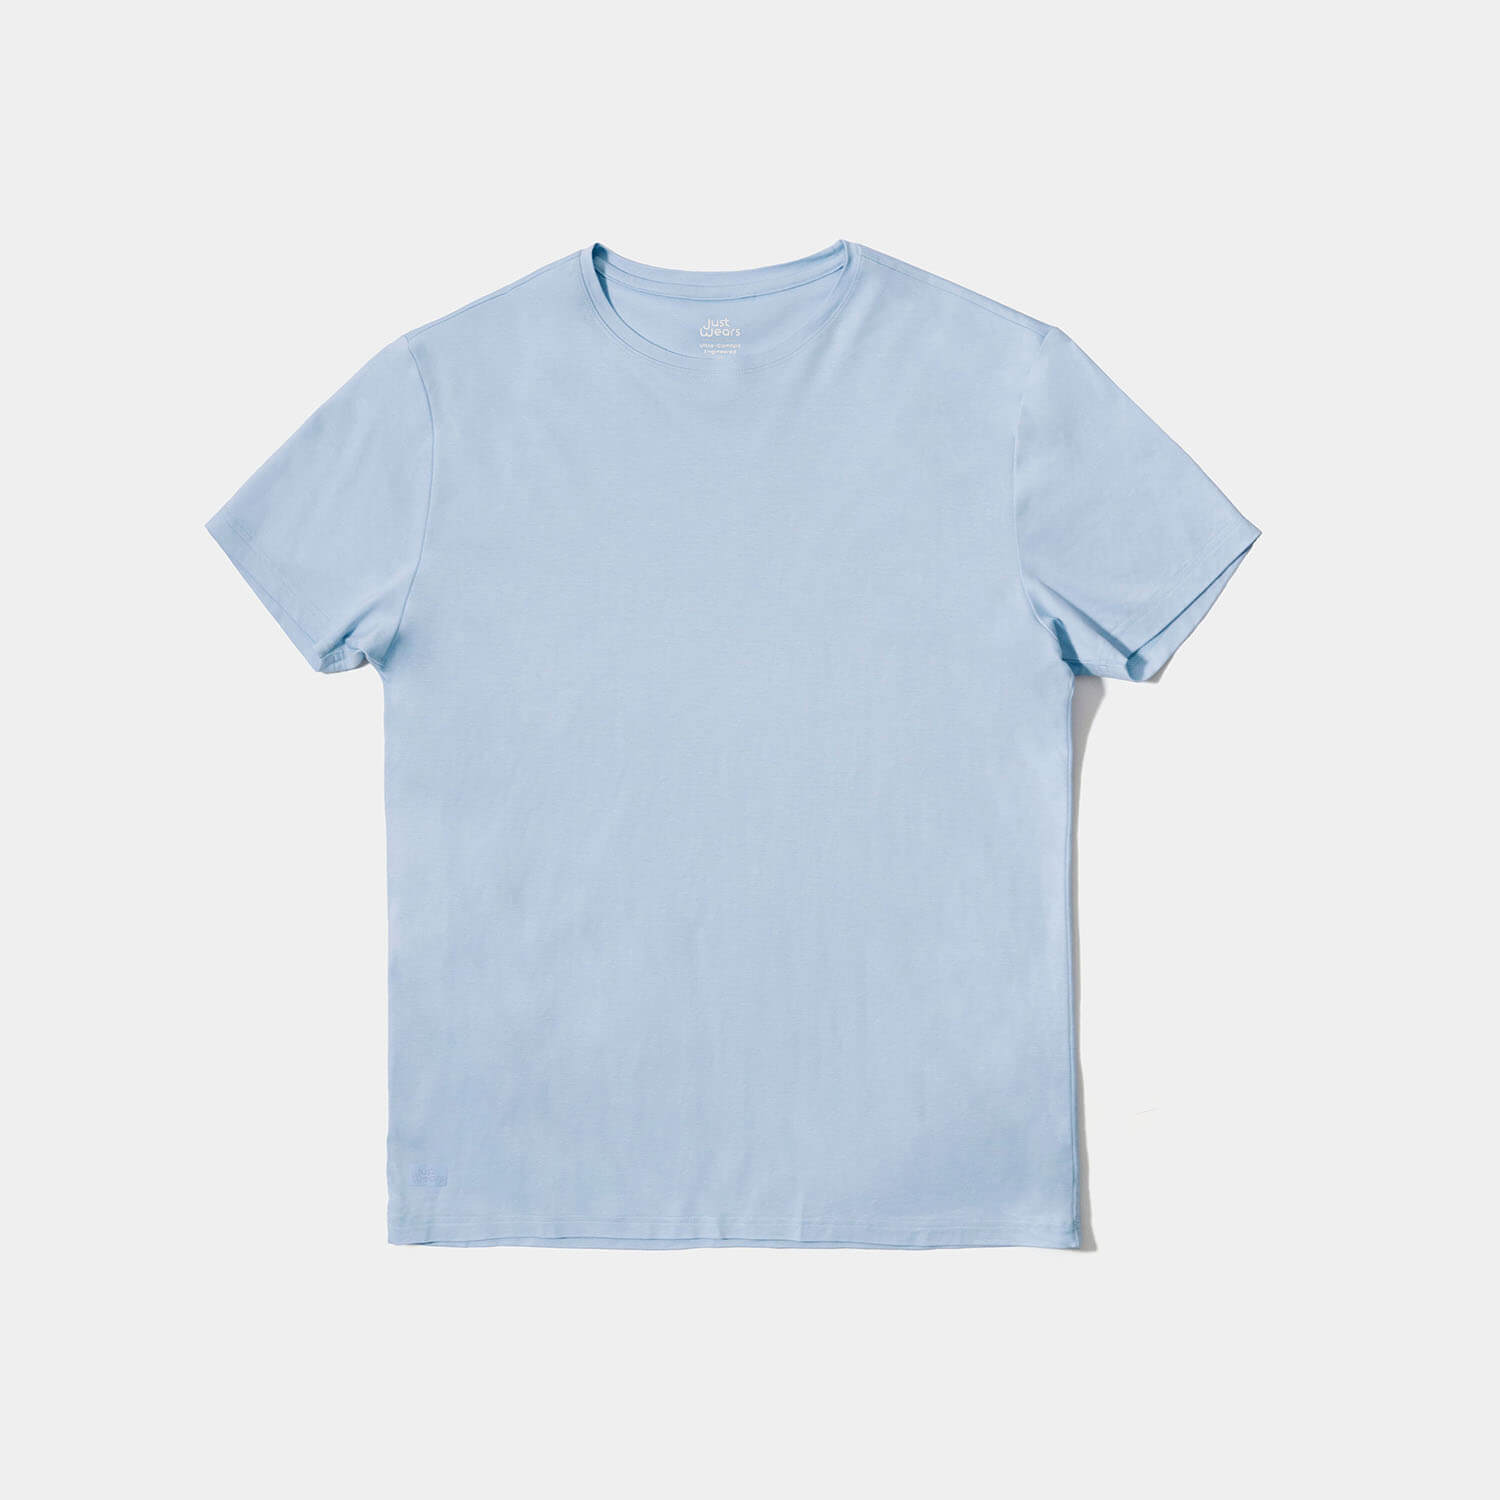 The Super Cool Tee - (color - Light Blue)